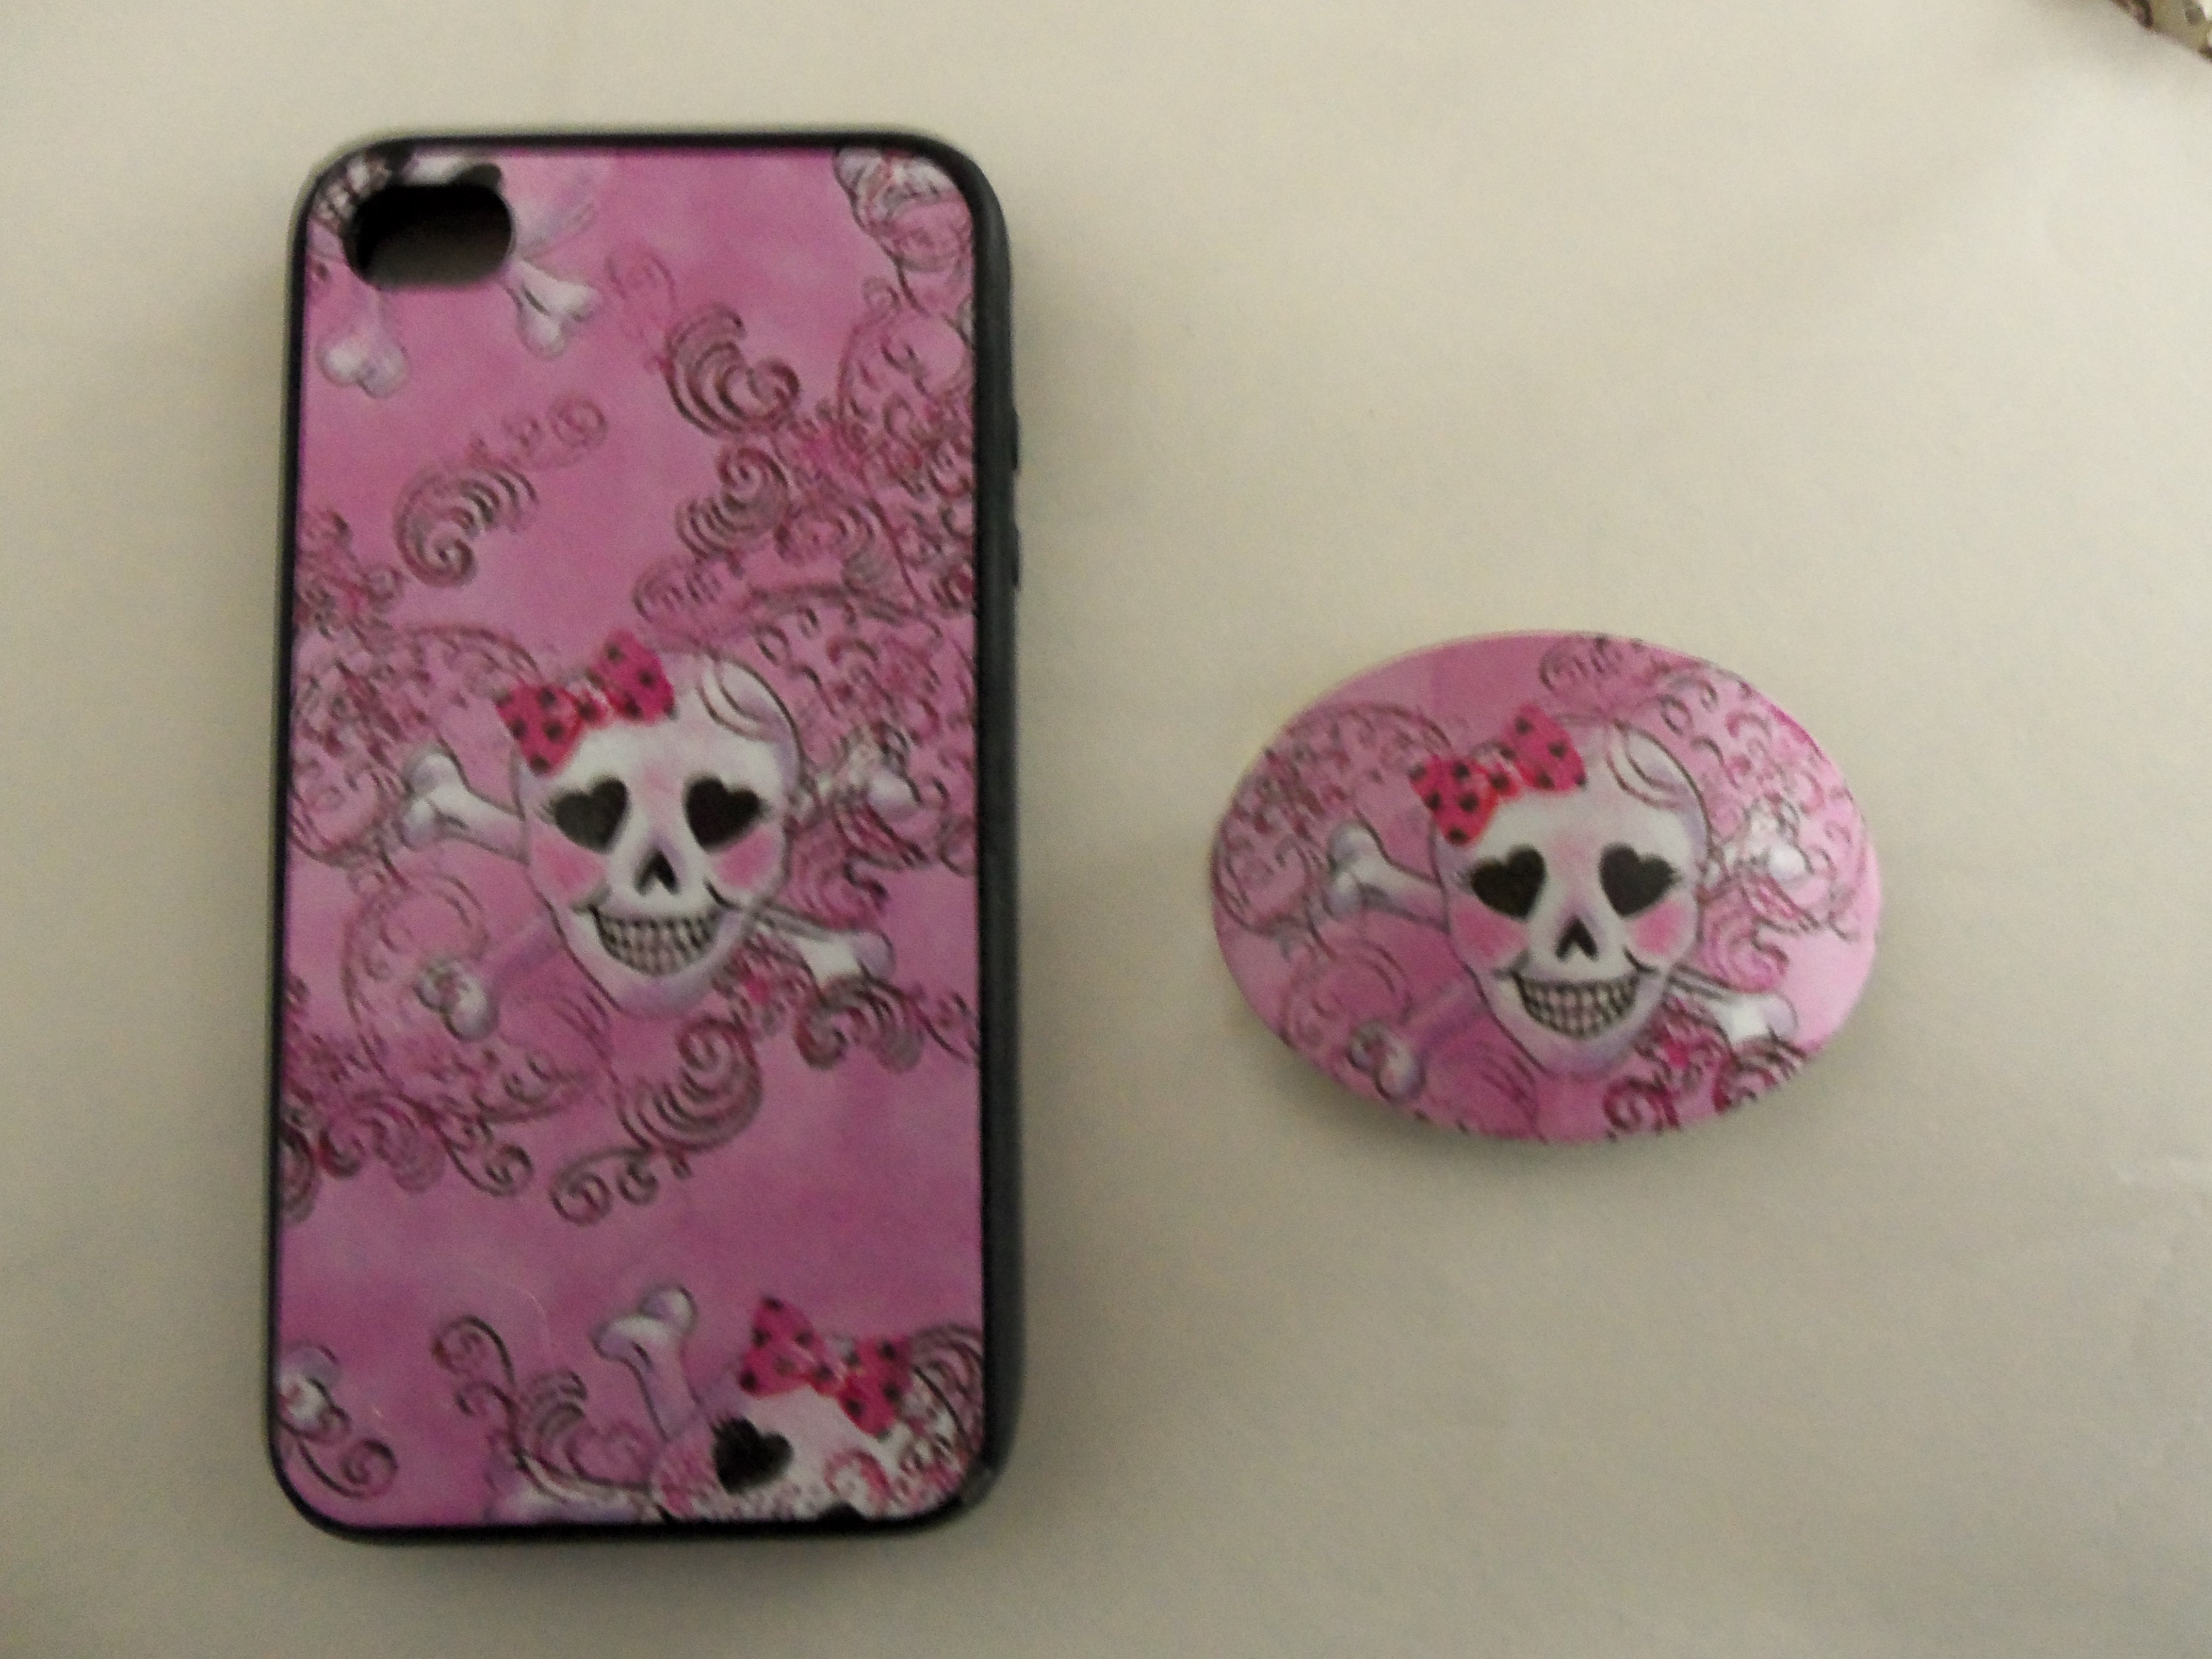 barrette & phone cover made with sublimation printing